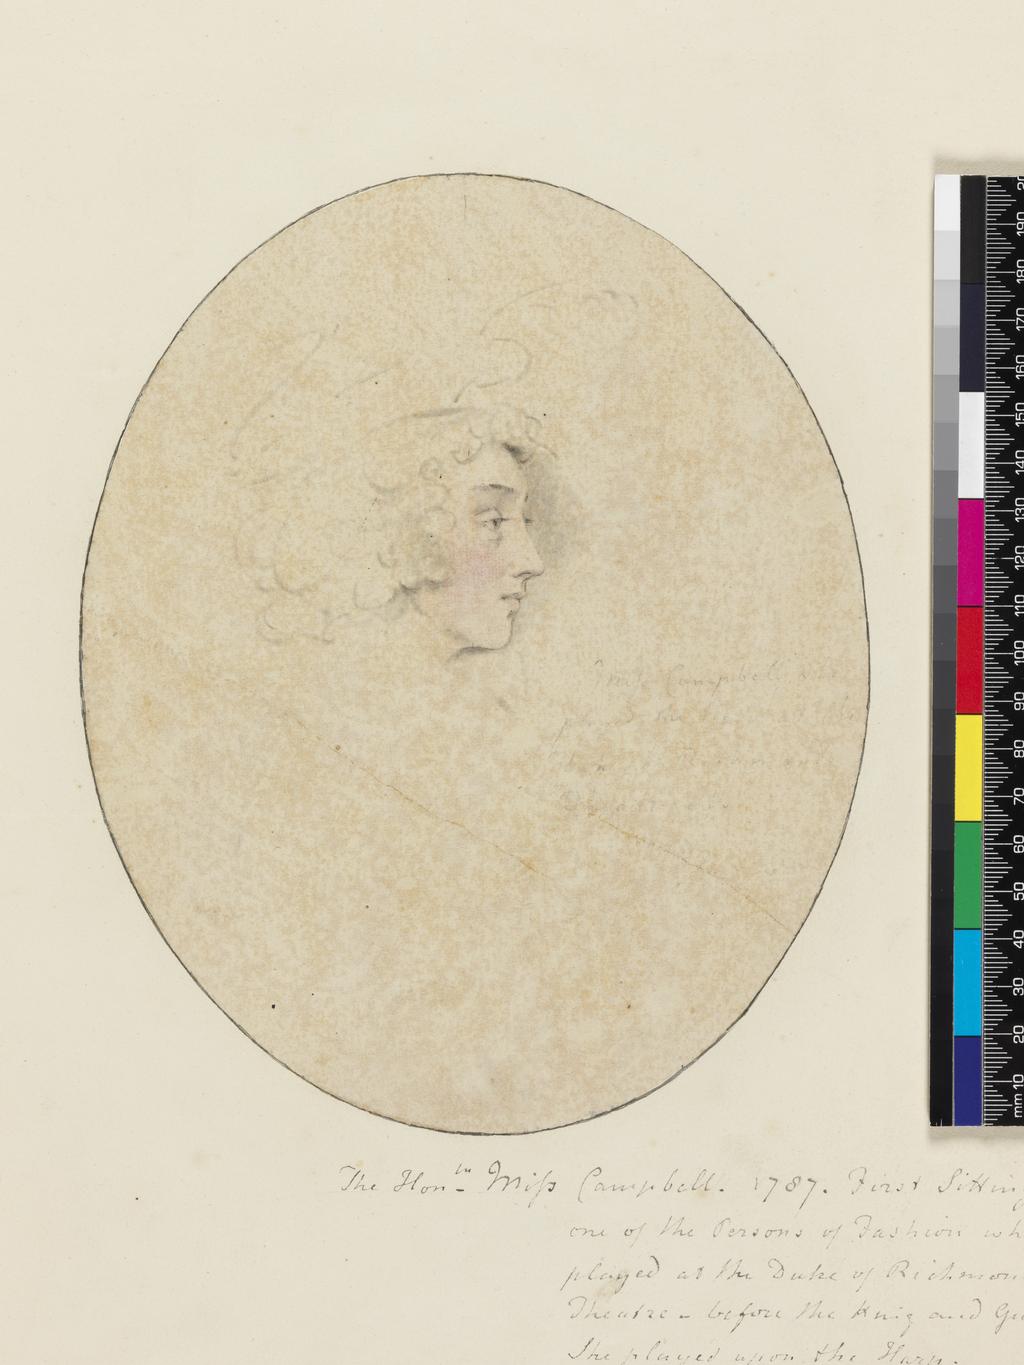 An image of Miss Campbell. Downman, John (British, 1750-1824). Laid down on recto of album sheet, surrounded by drawn ink line. Black and red chalk, with stump on paper, laid down (chalk or watercolour applied to verso), height 202 mm, width 165 mm, 1787.